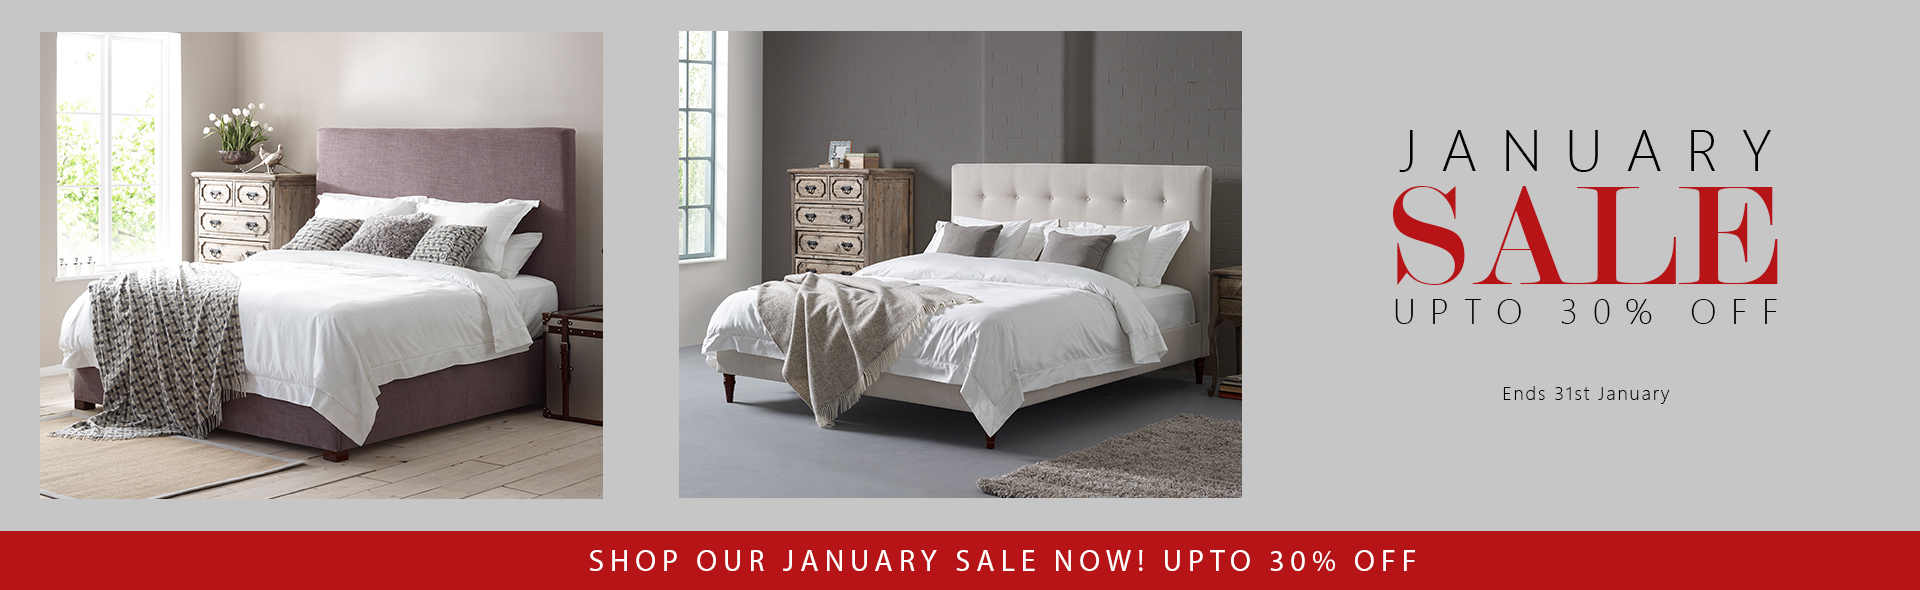 The English Bed Company | Upholstered Beds & Headboards - UK Delivery